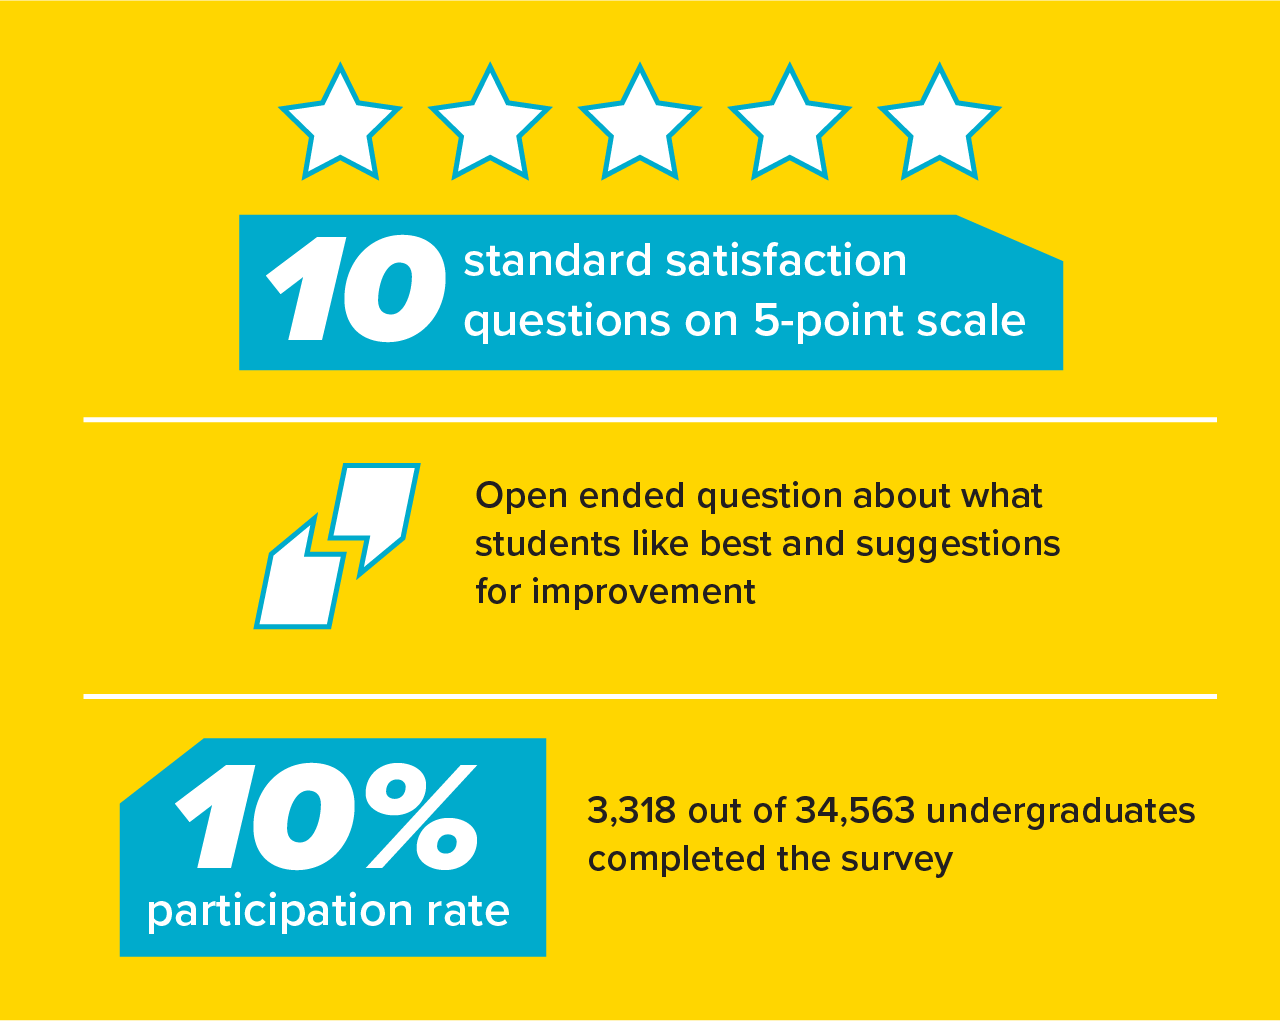 Survey Results 1: 10 standard satisfaction questions on a 5-point scale, open-ended question about what students like best and suggestions for improvement, 10% participation rate (3,318 out of 34,563 undergraduates completed the survey)